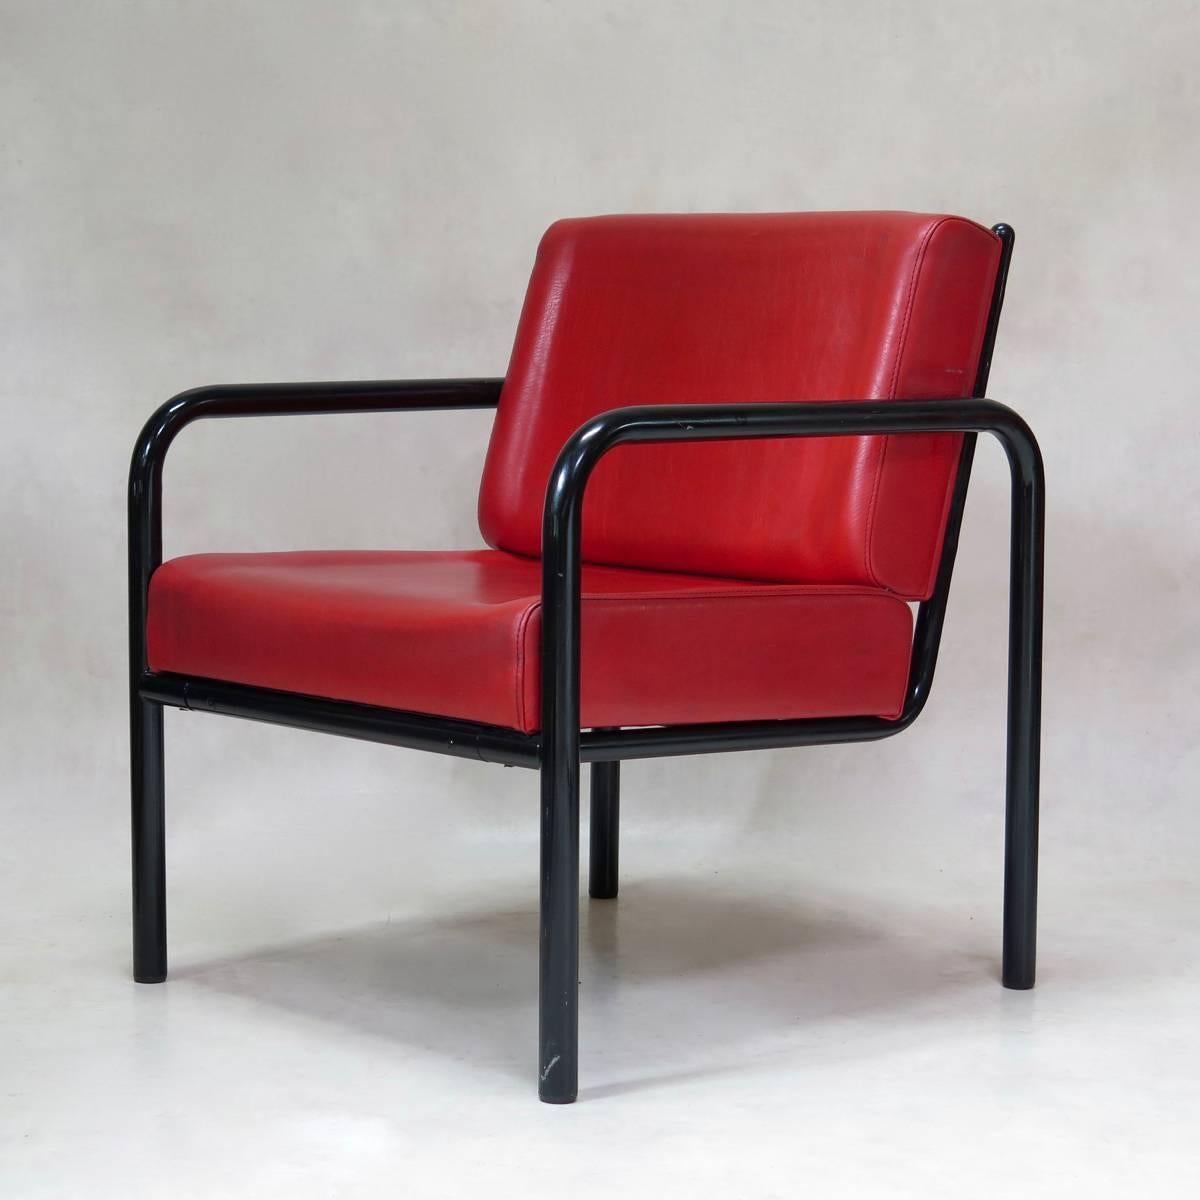 Mid-Century Modern Tubular Metal and Faux Leather Armchair, France, circa 1950s For Sale